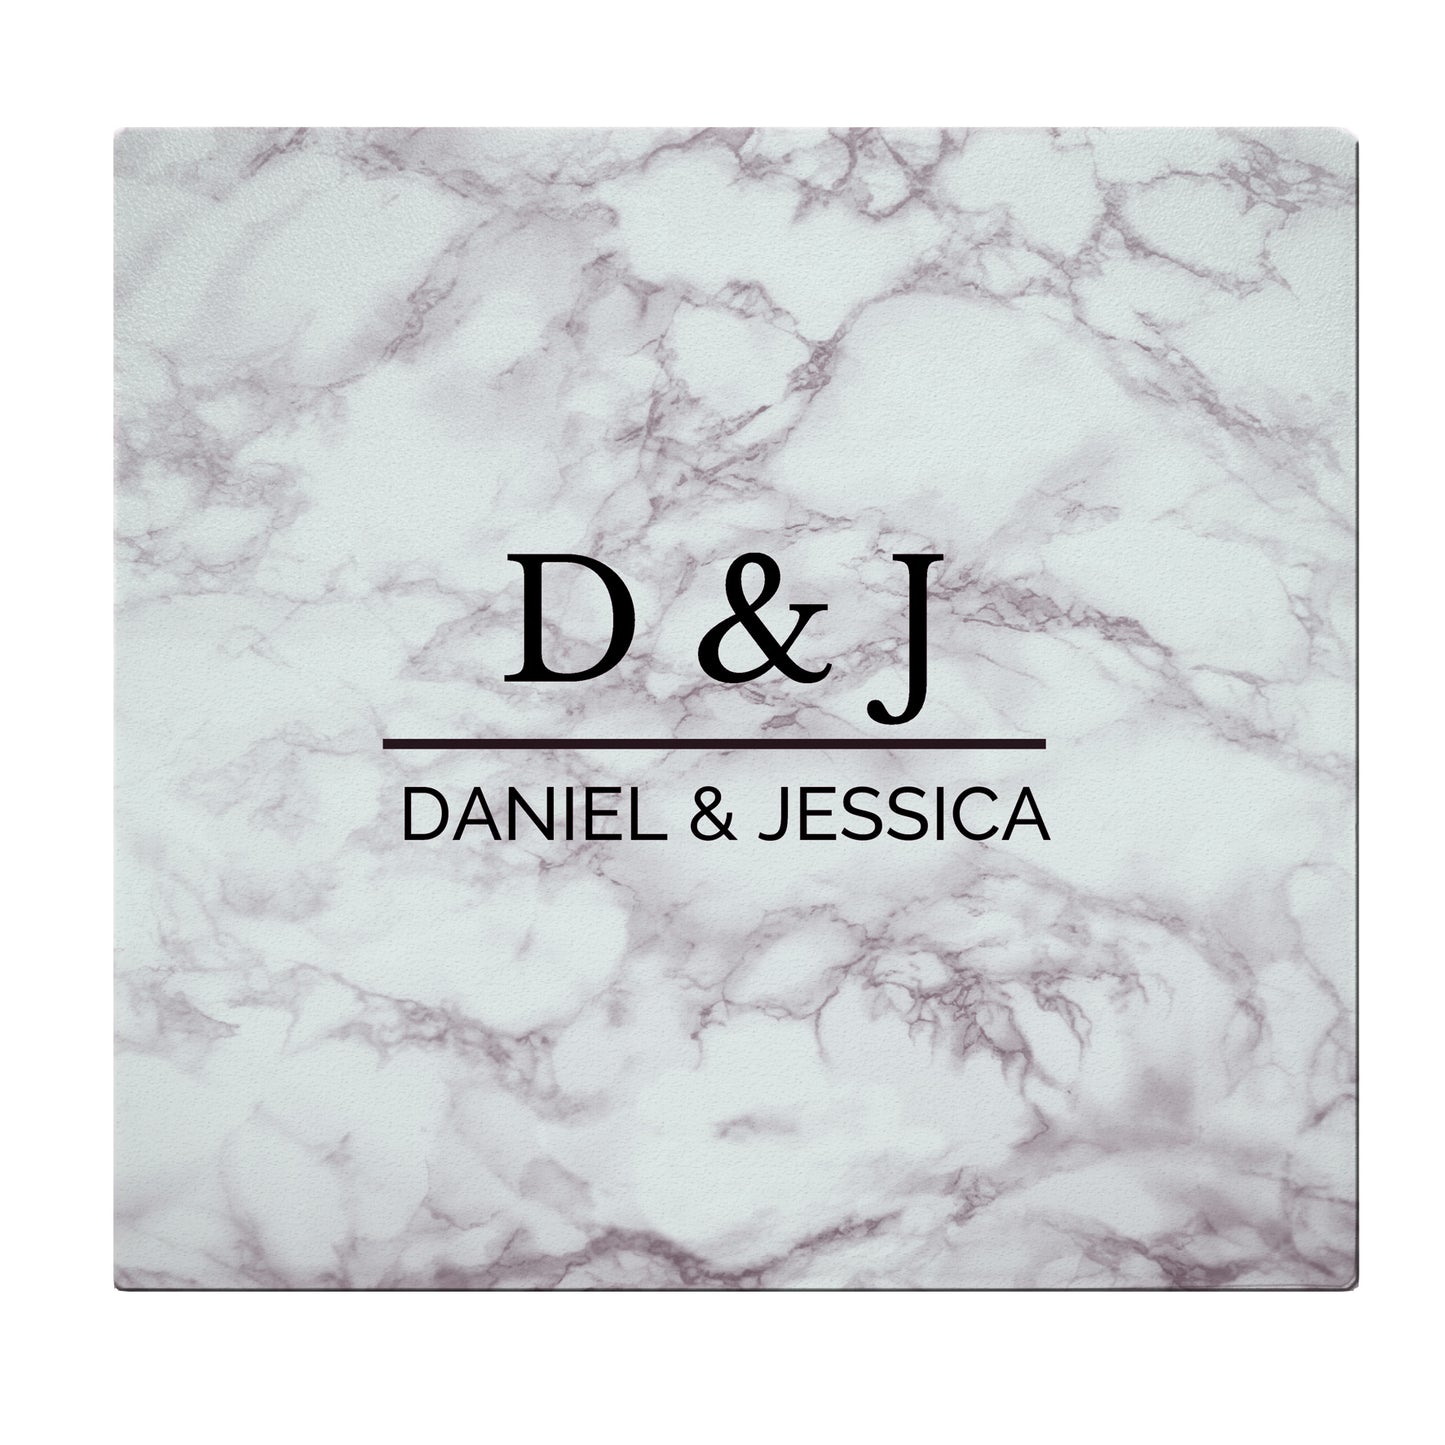 Personalised Marble Effect Glass Chopping Board/Worktop Saver - Personalise It!